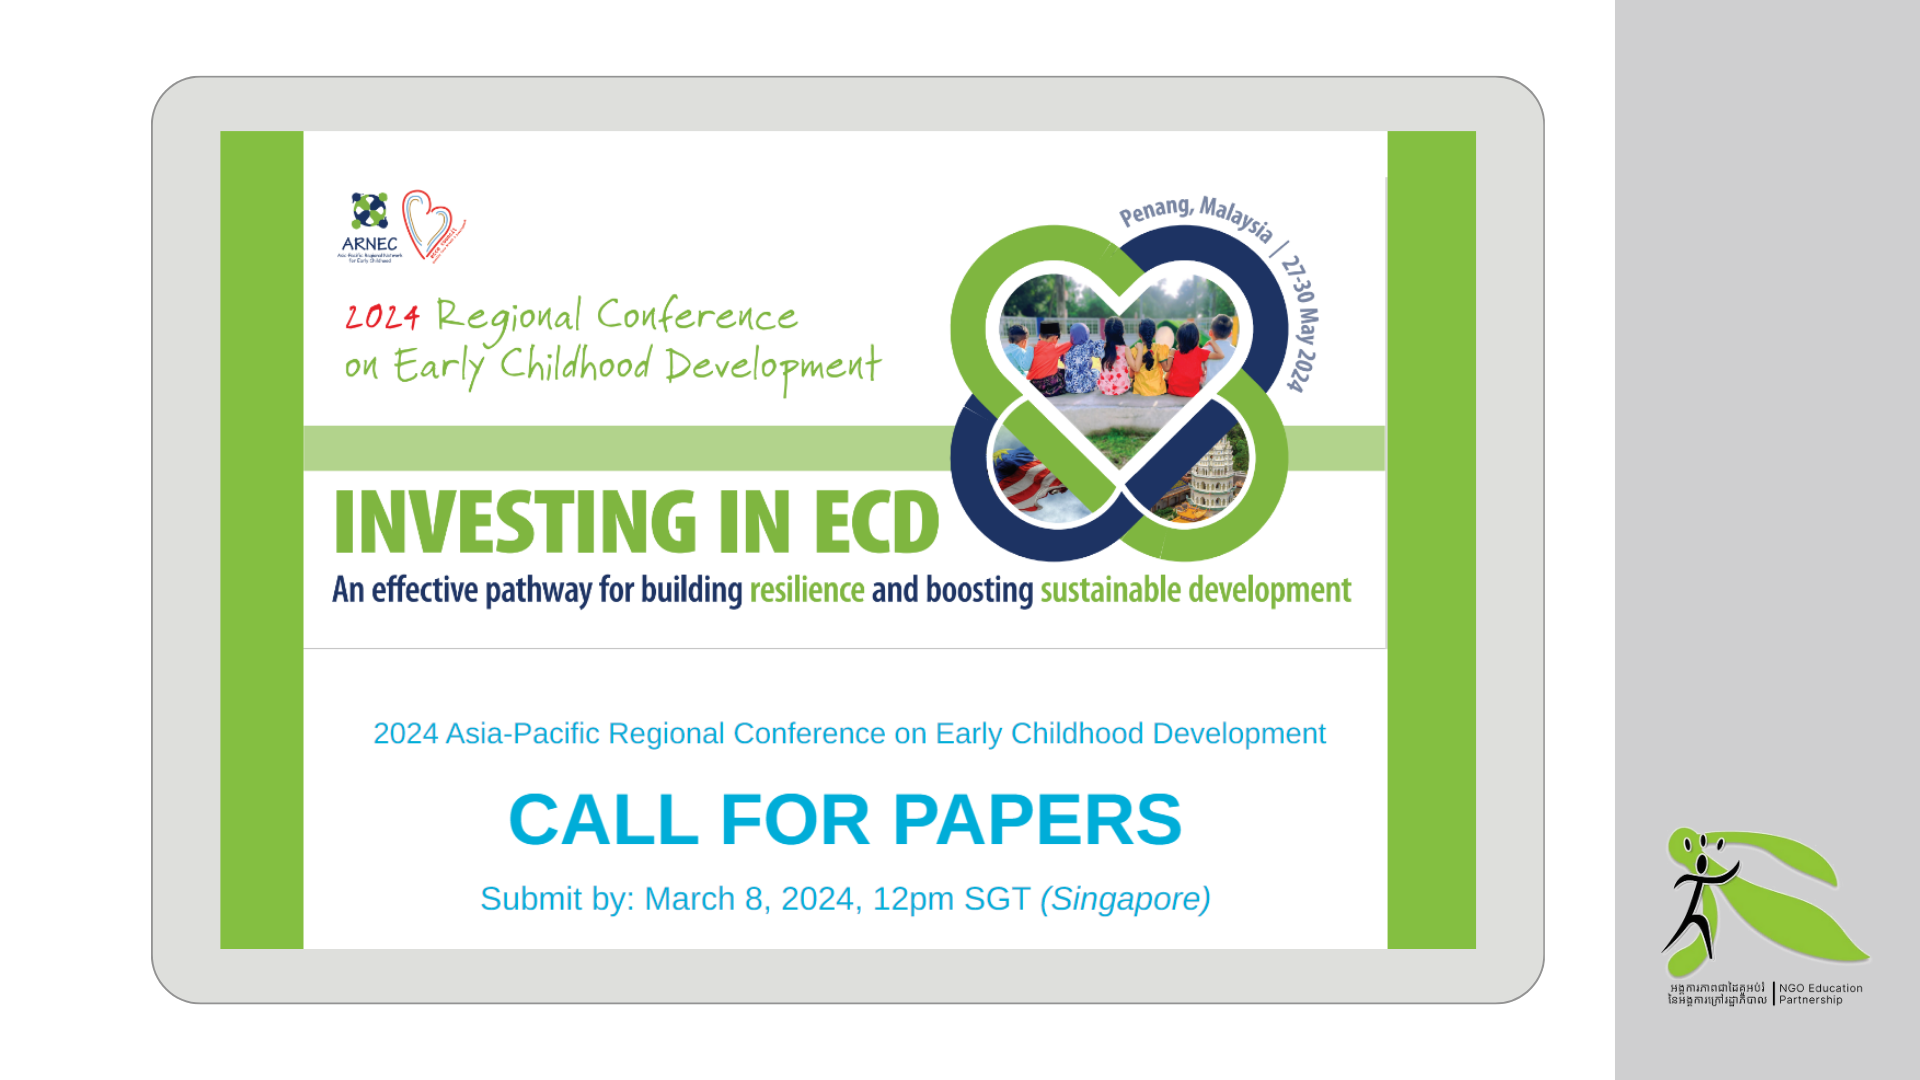 Join ARNEC and the ECCE Council of Malaysia in the first face-to-face Asia-Pacific Regional ECD Conference since the pandemic in PENANG, MALAYSIA on MAY 27 to 30, 2024!